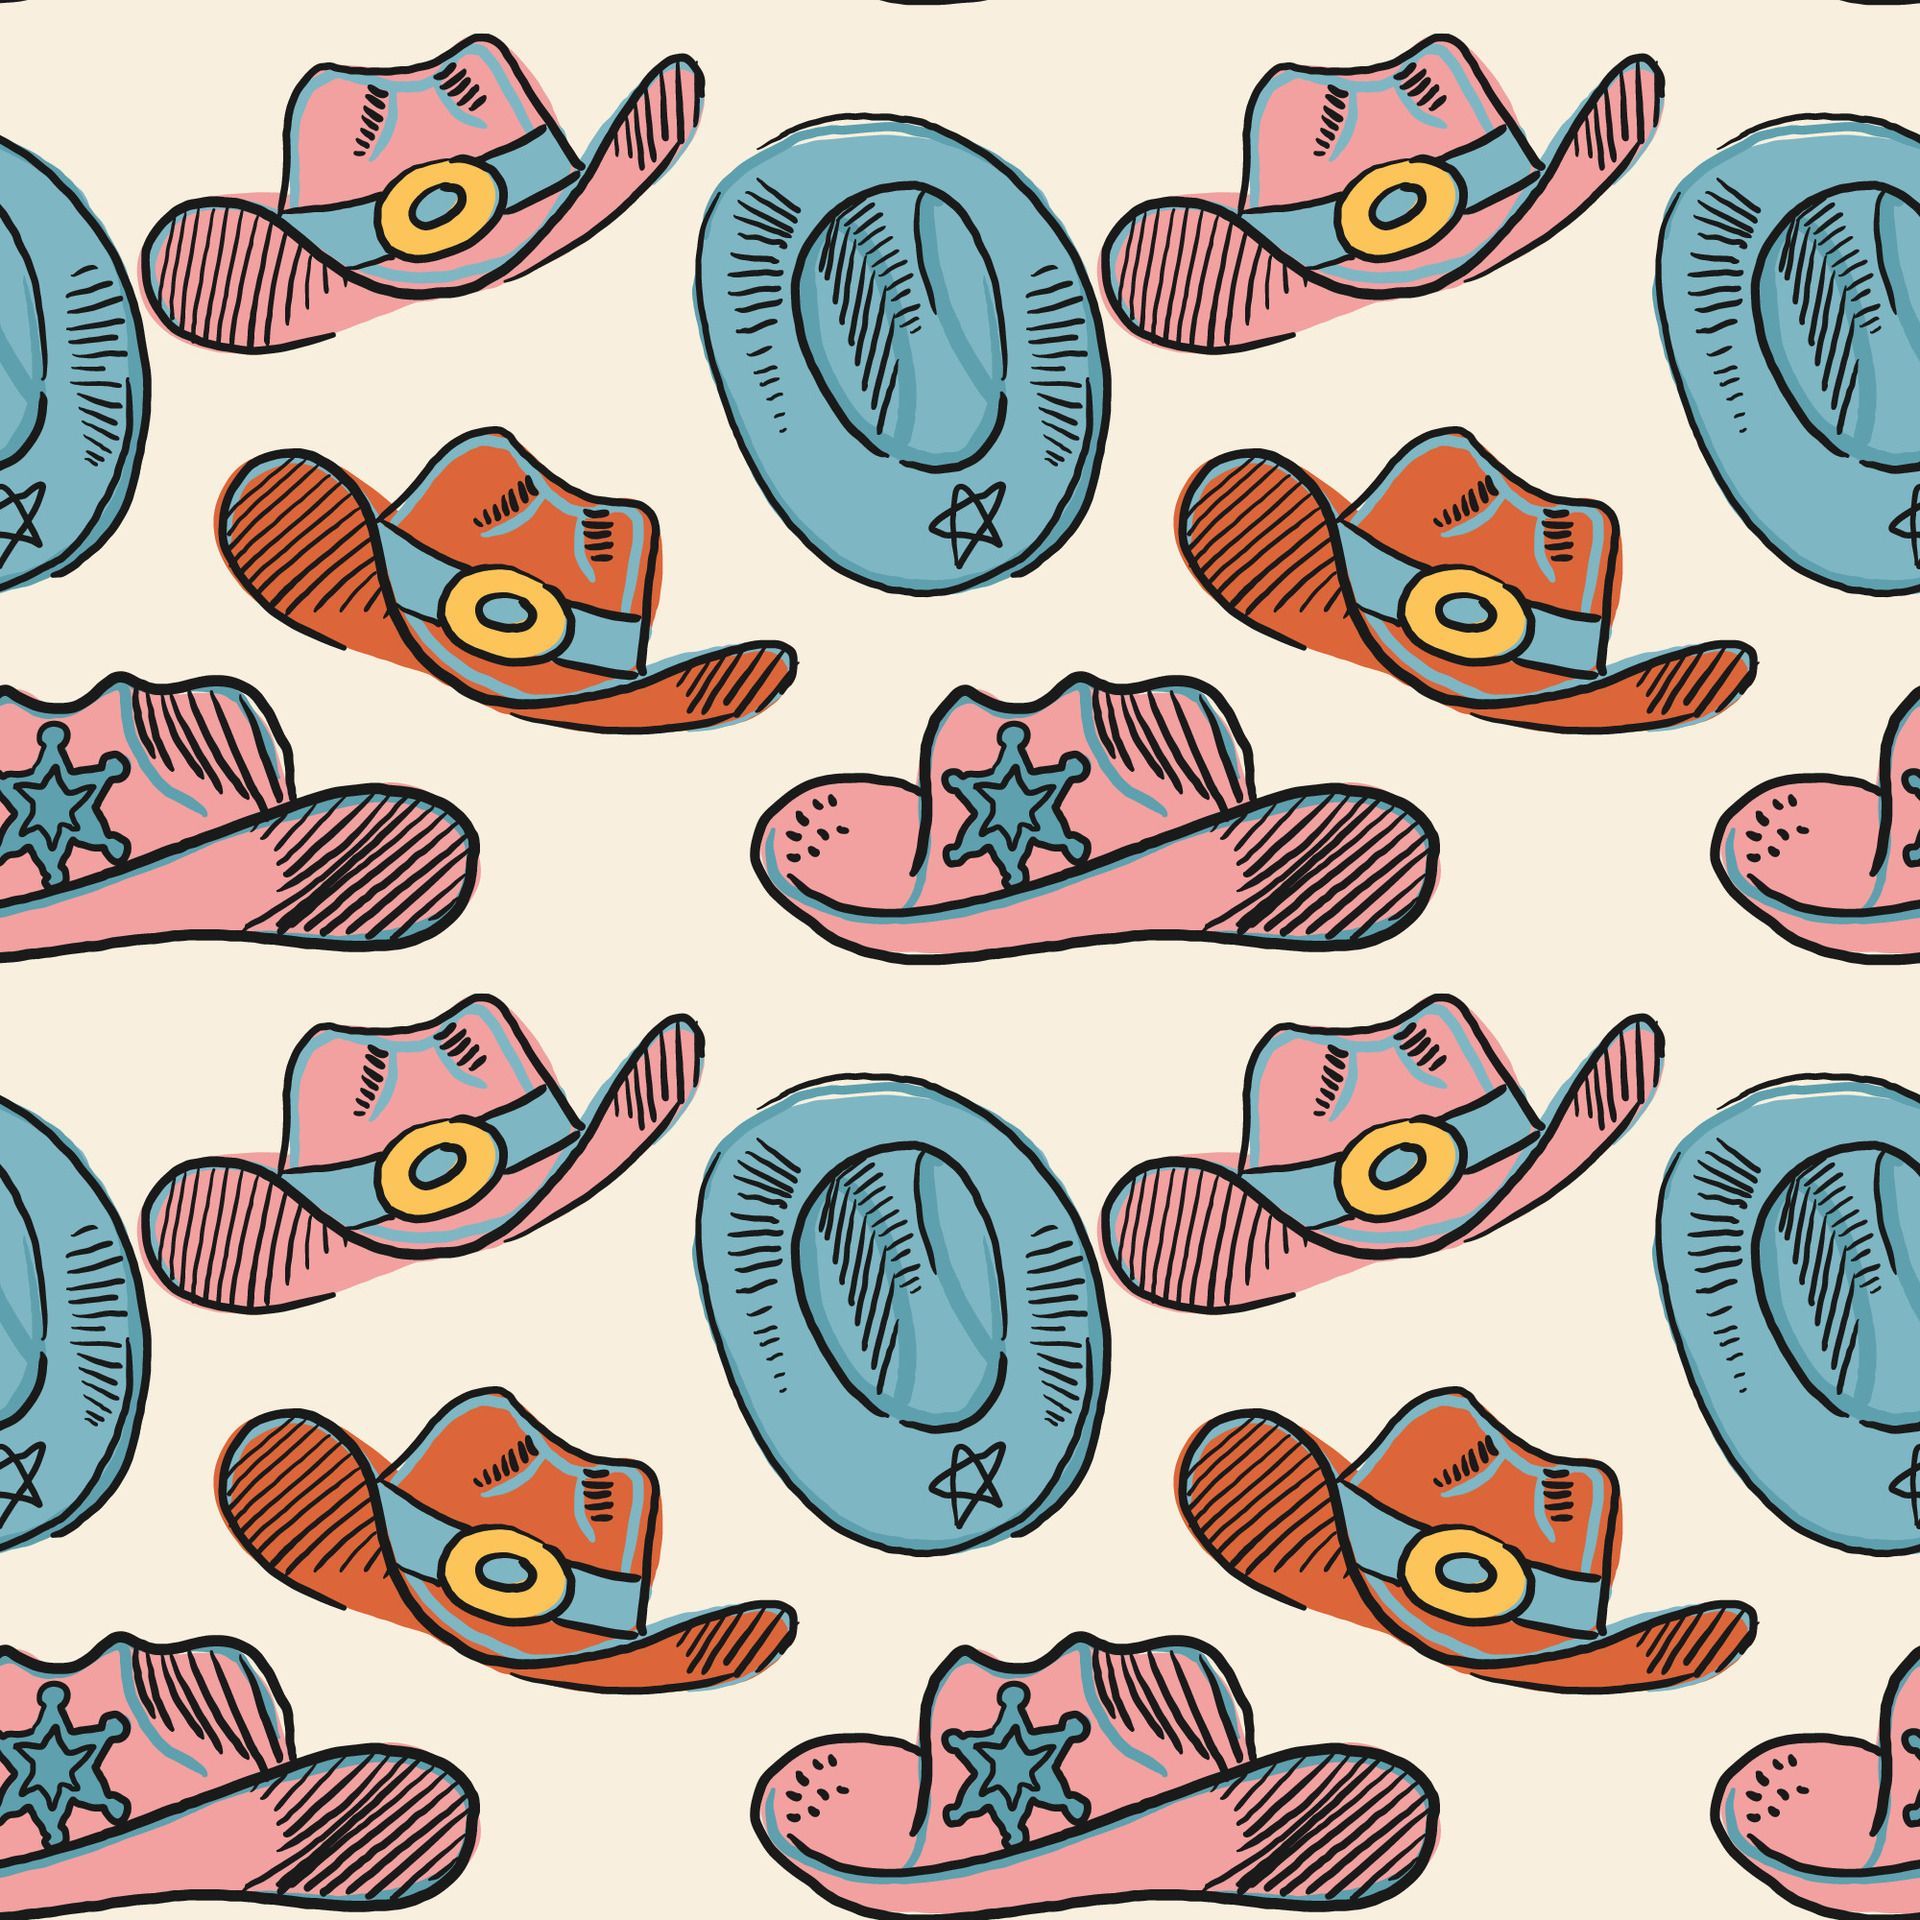 Cowgirl western theme, wild west concept seamless pattern. Home decor, Textile design, Wrapping paper, Stationery, Scrapbooking, Digital wallpaper, Website background. Vector illustration